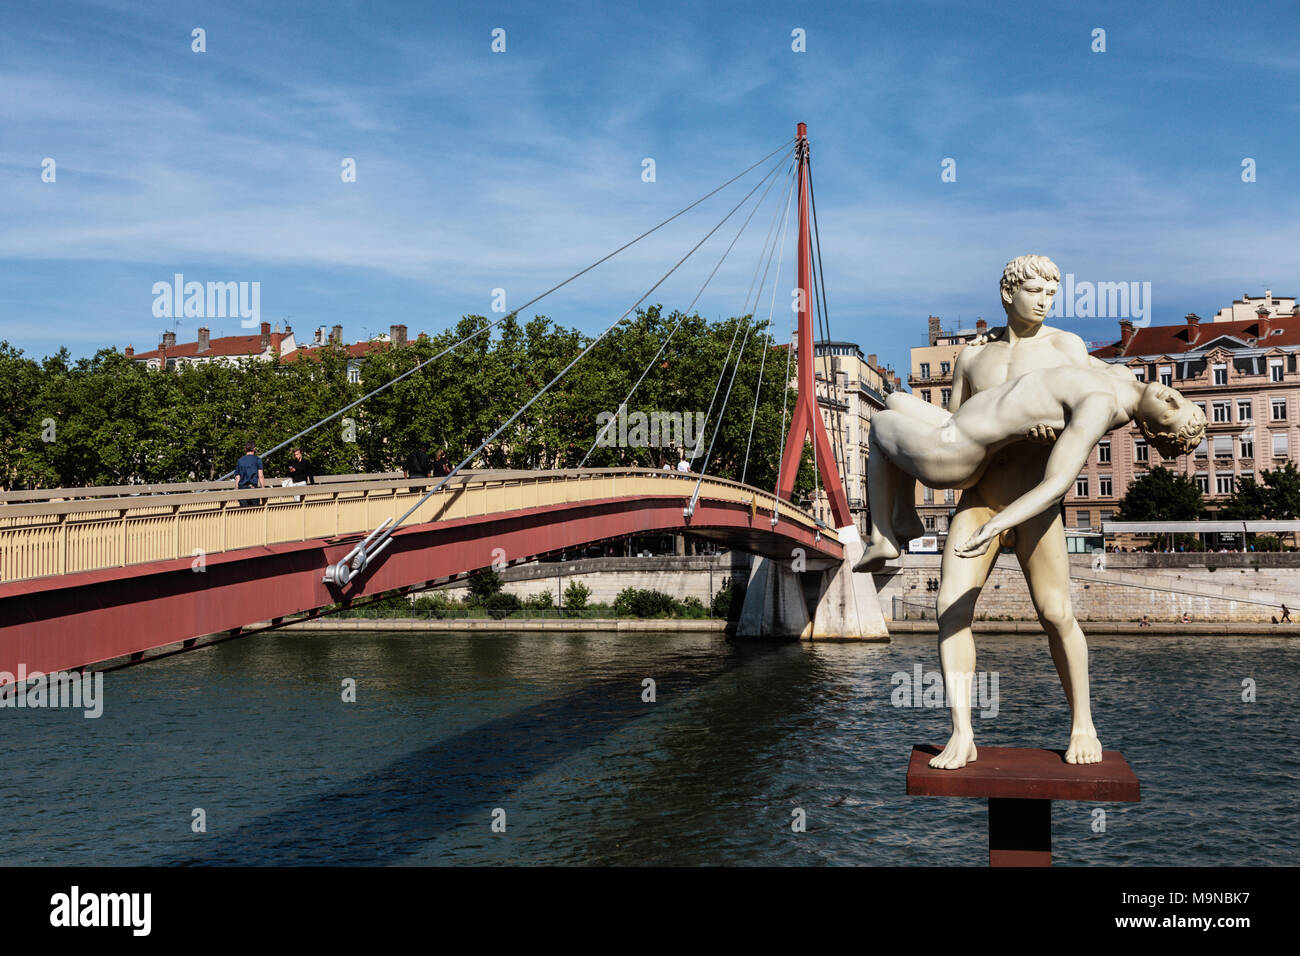 The Weight of Oneself statue on the Saone Banks near the Palais de Justice footbridge, Lyon, Rhone, France. Stock Photo